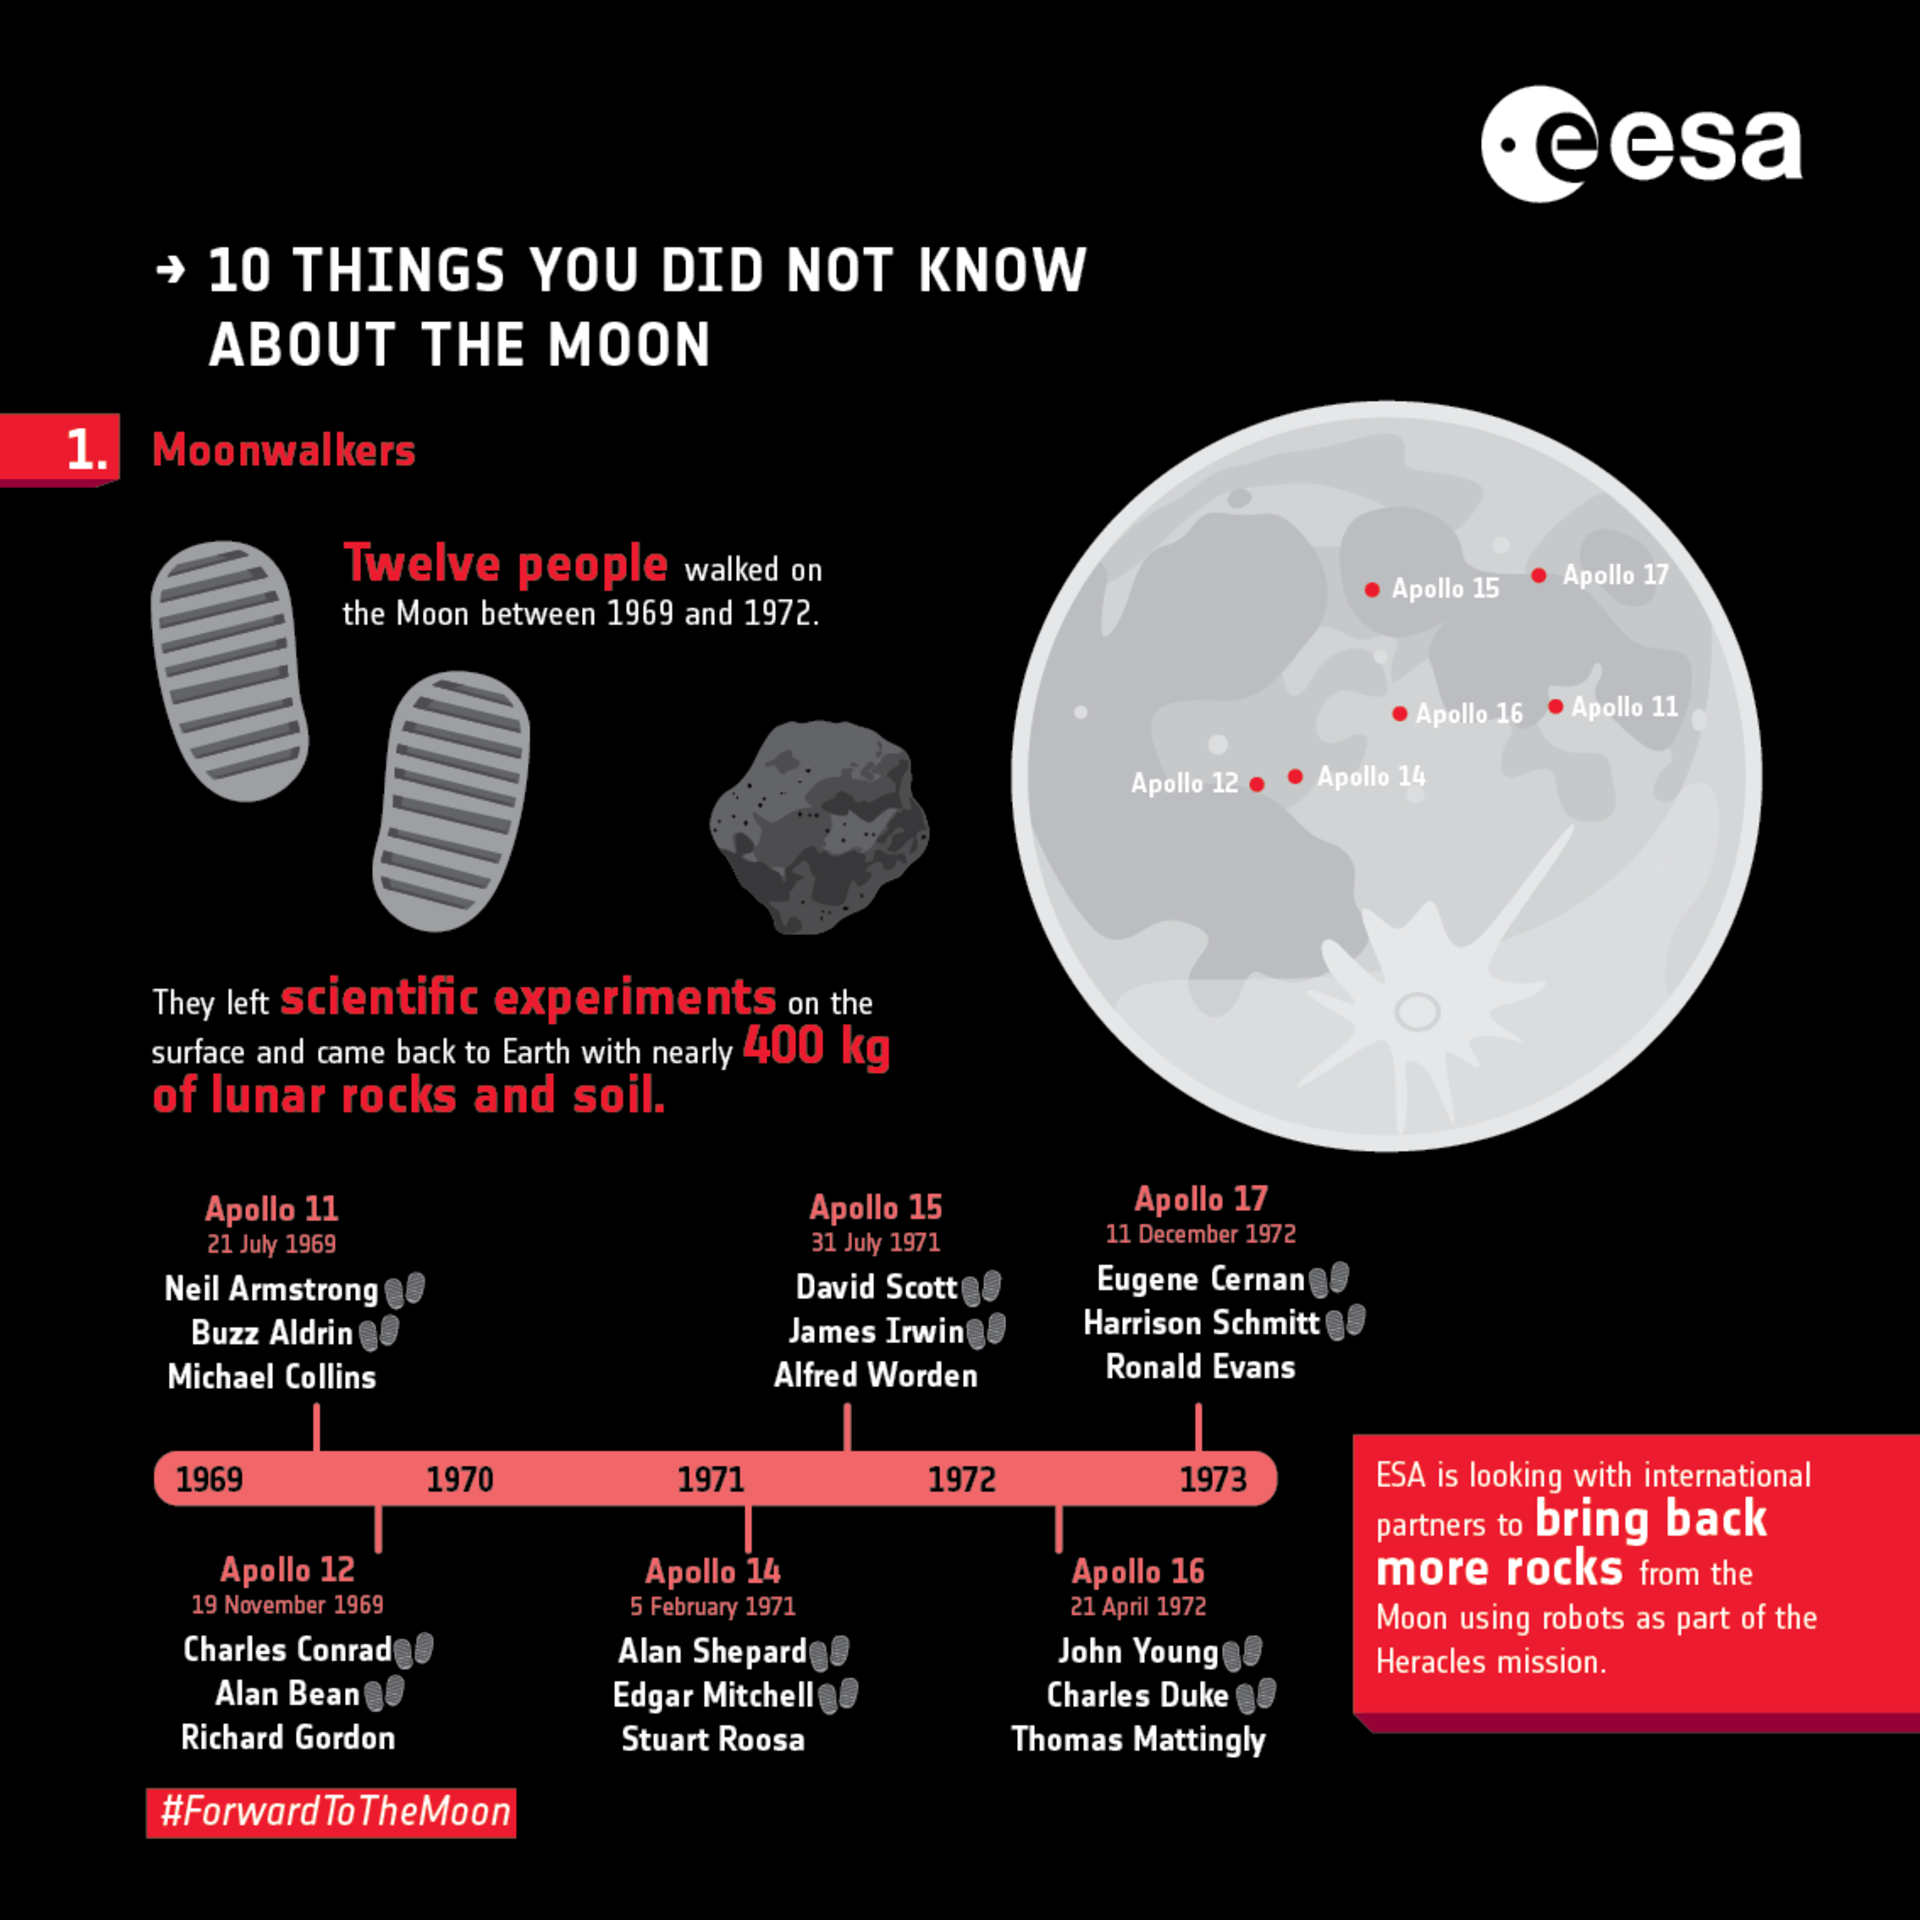 Ten things you did not know about the Moon: 1. Moonwalkers